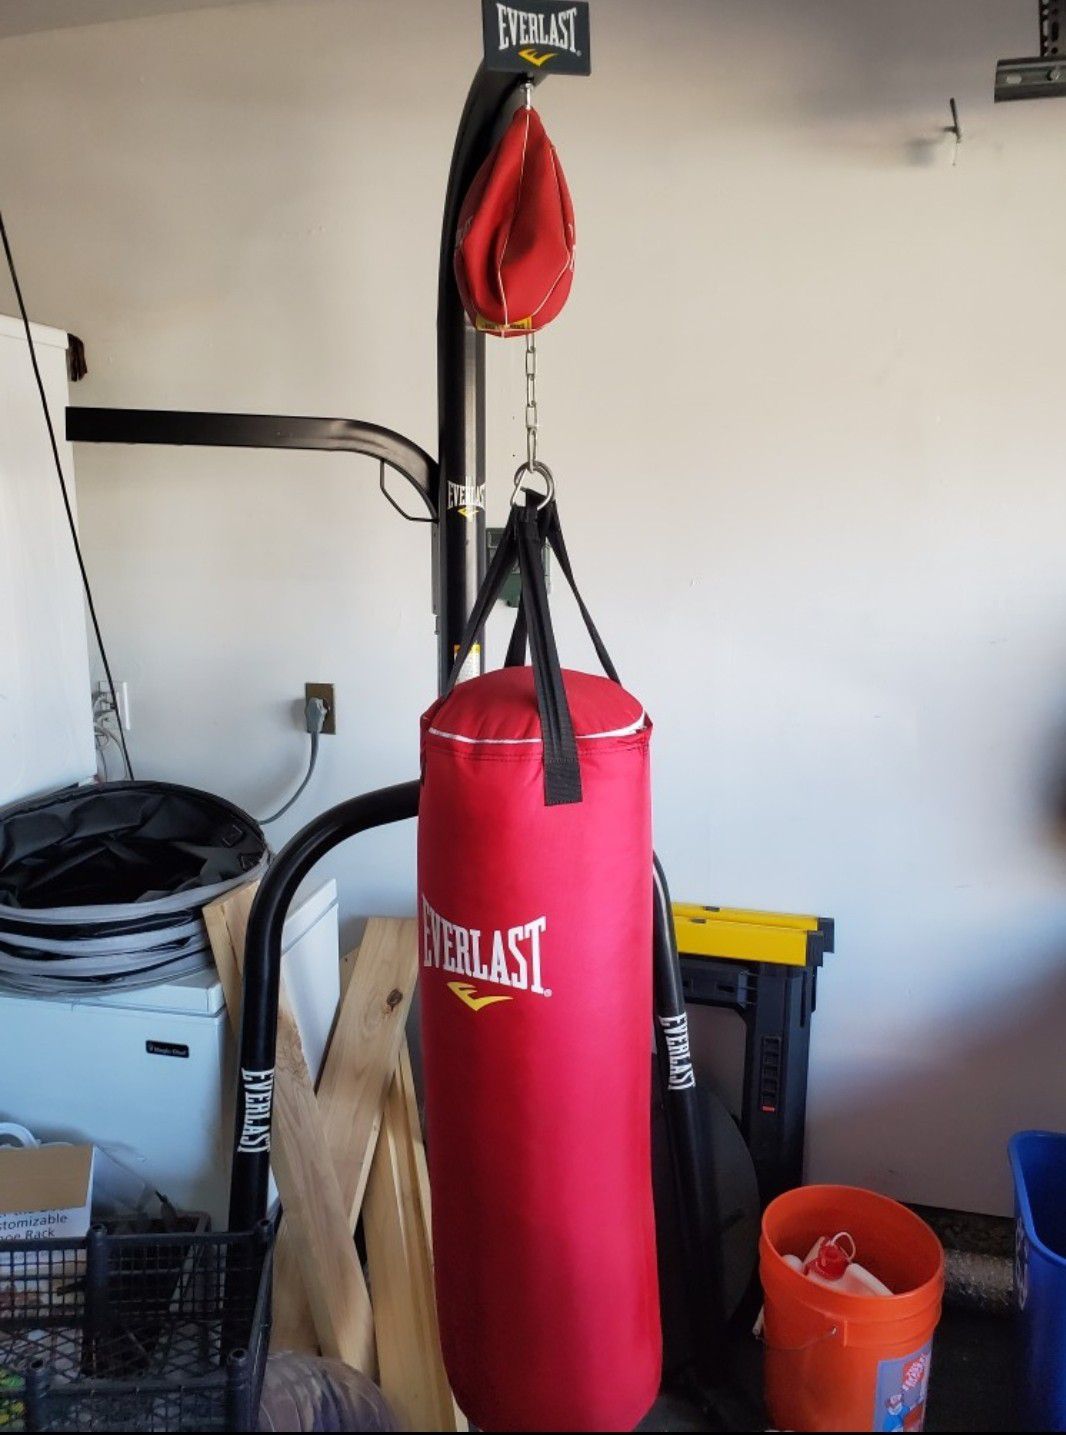 Everlast Punching bag and speed bag